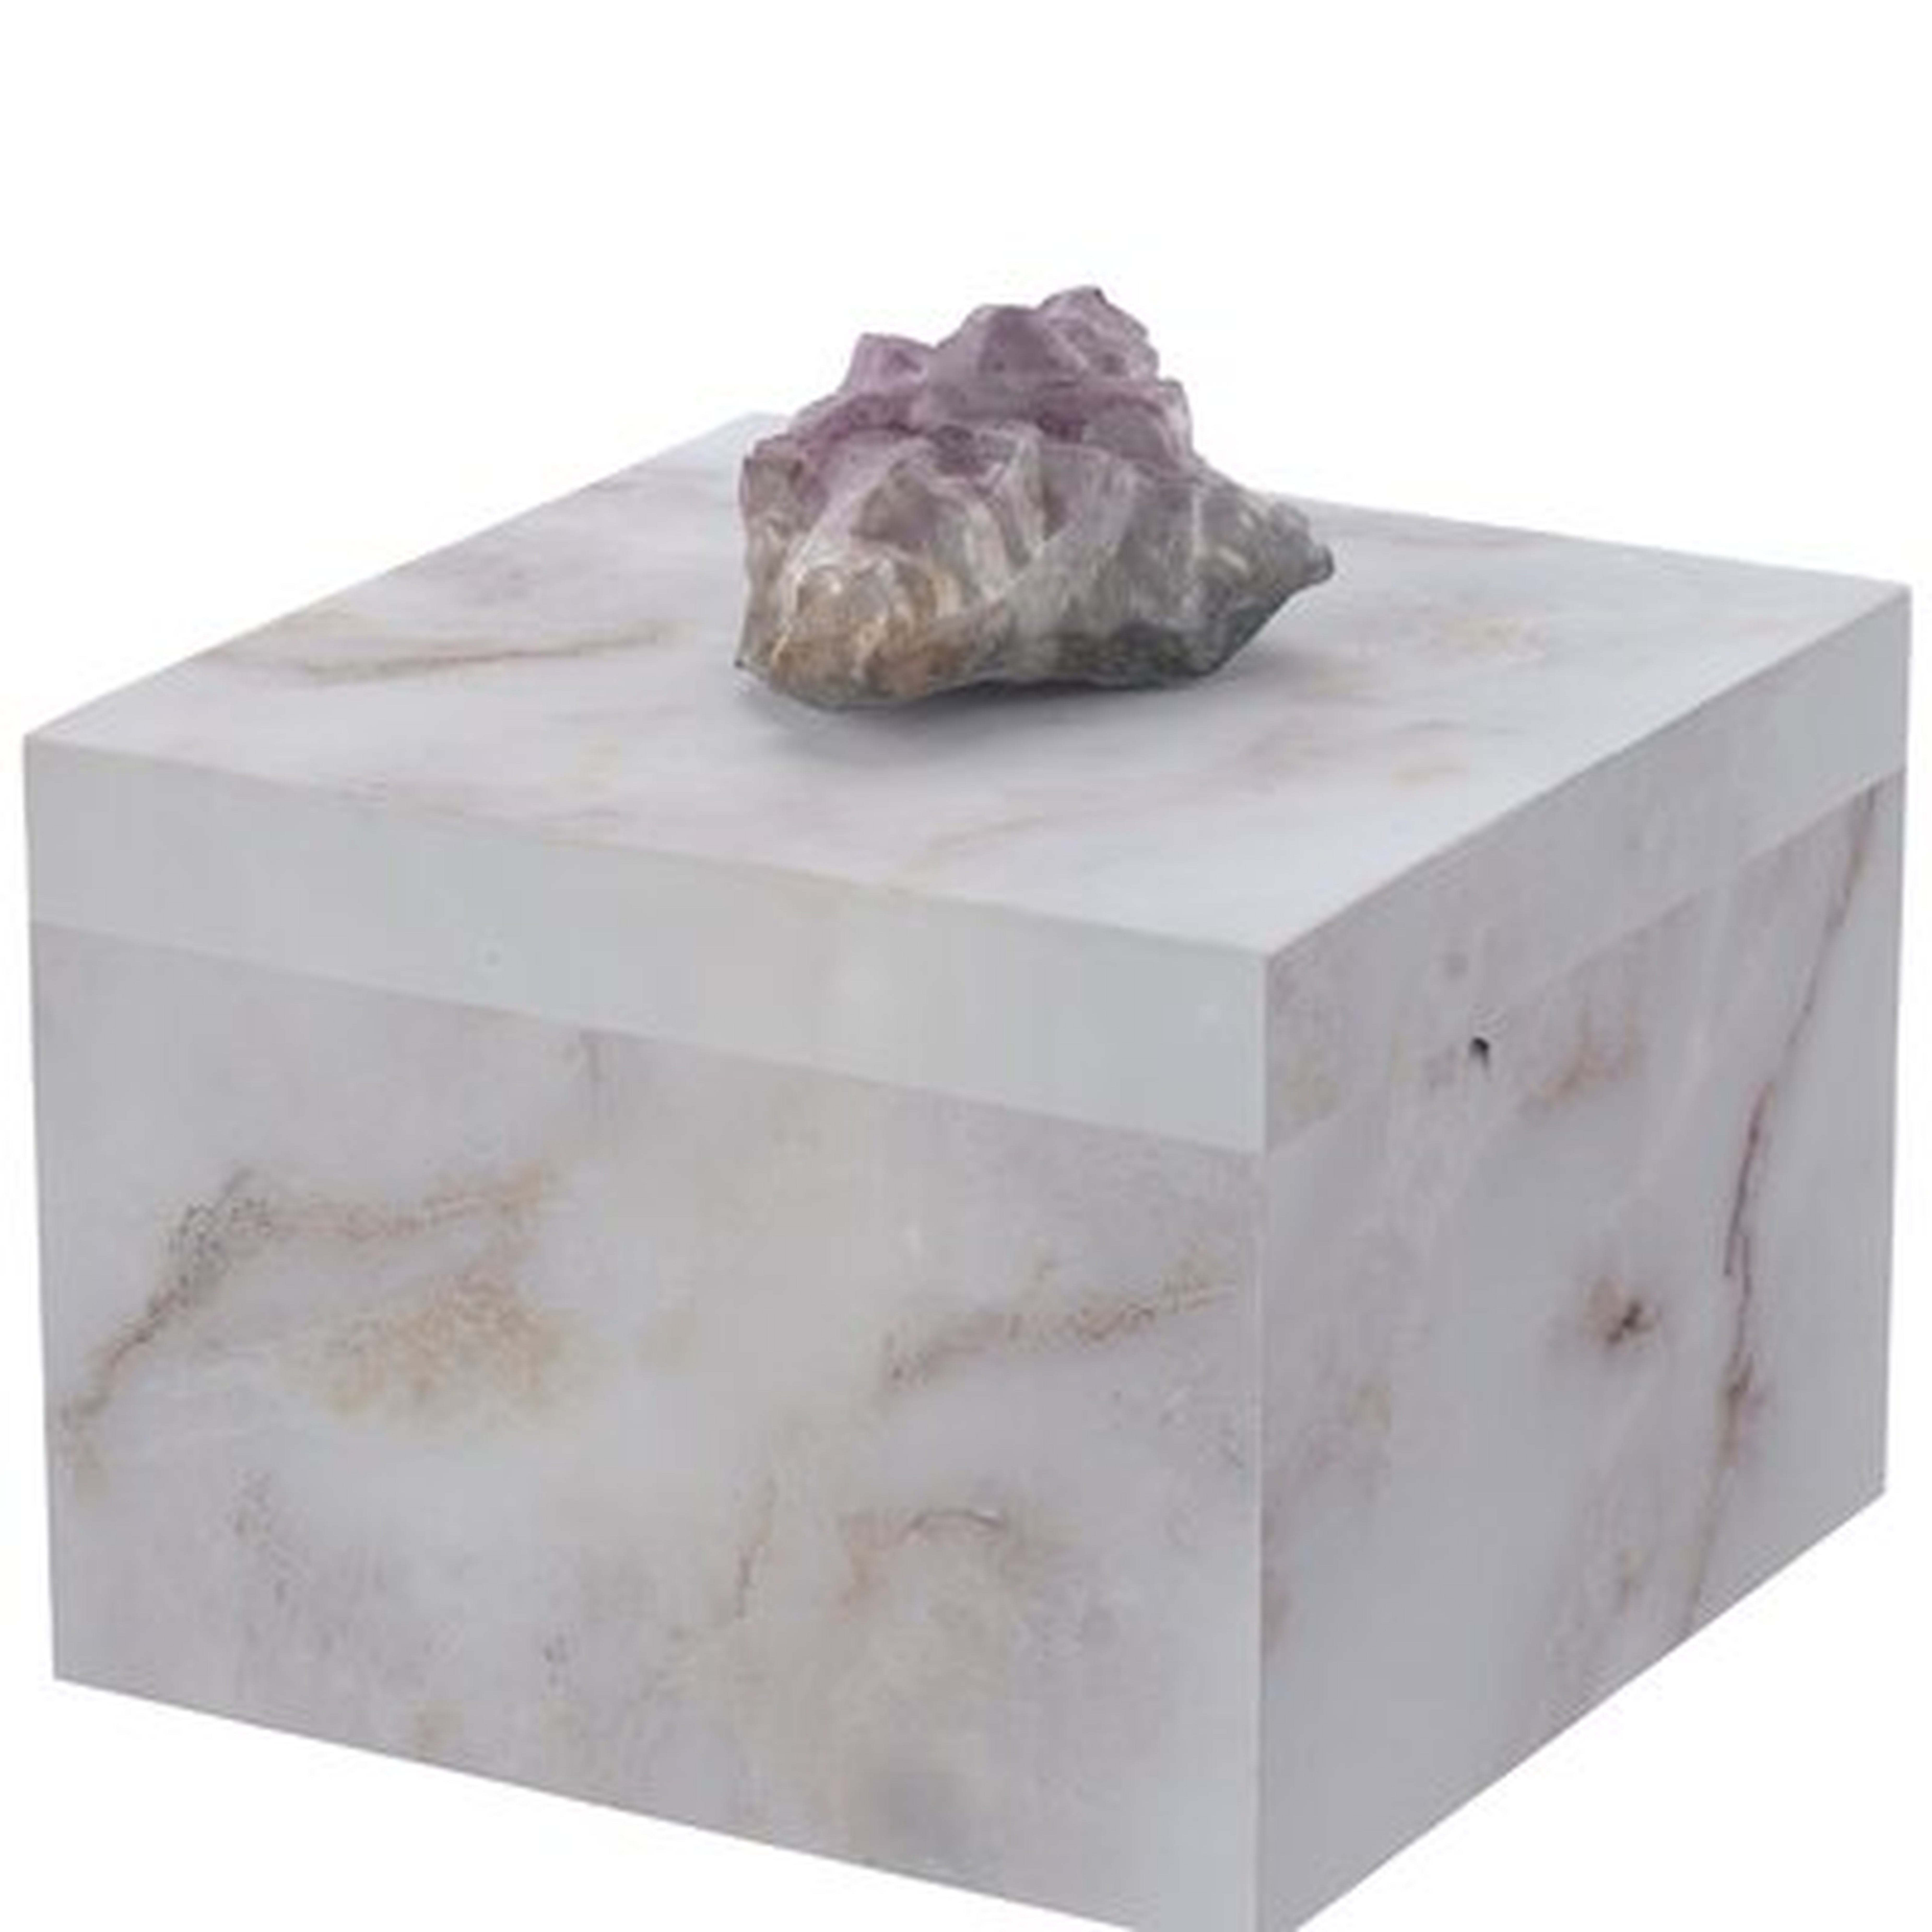 Barling Natural Geode and Composite Decorative Box - Birch Lane